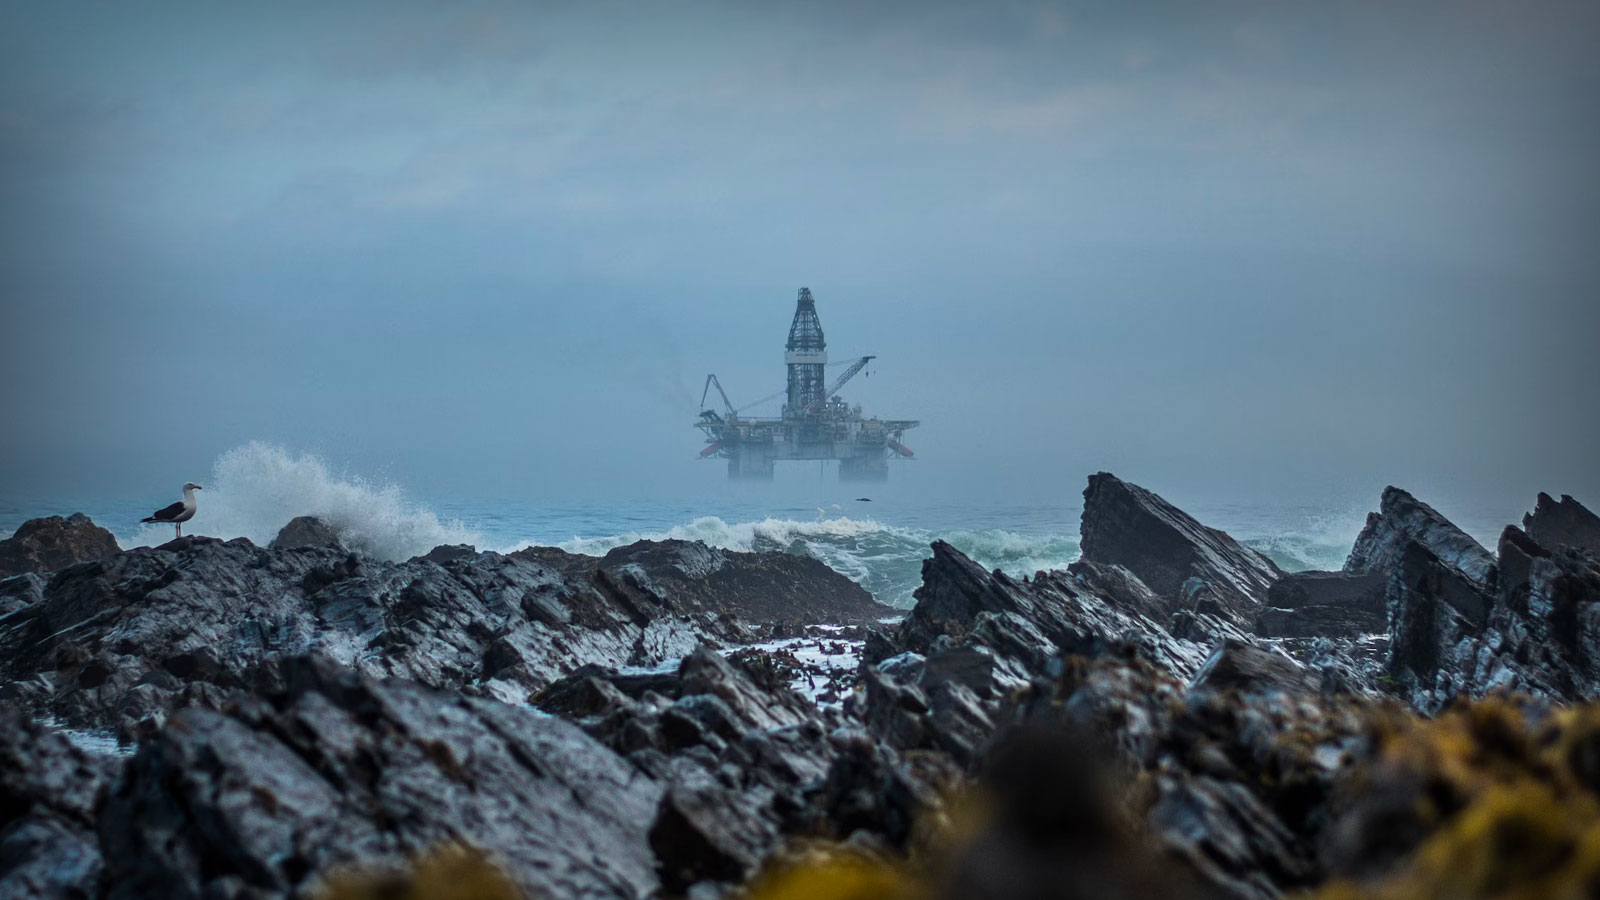 Ominous offshore oil rig with jagged rocks in foreground